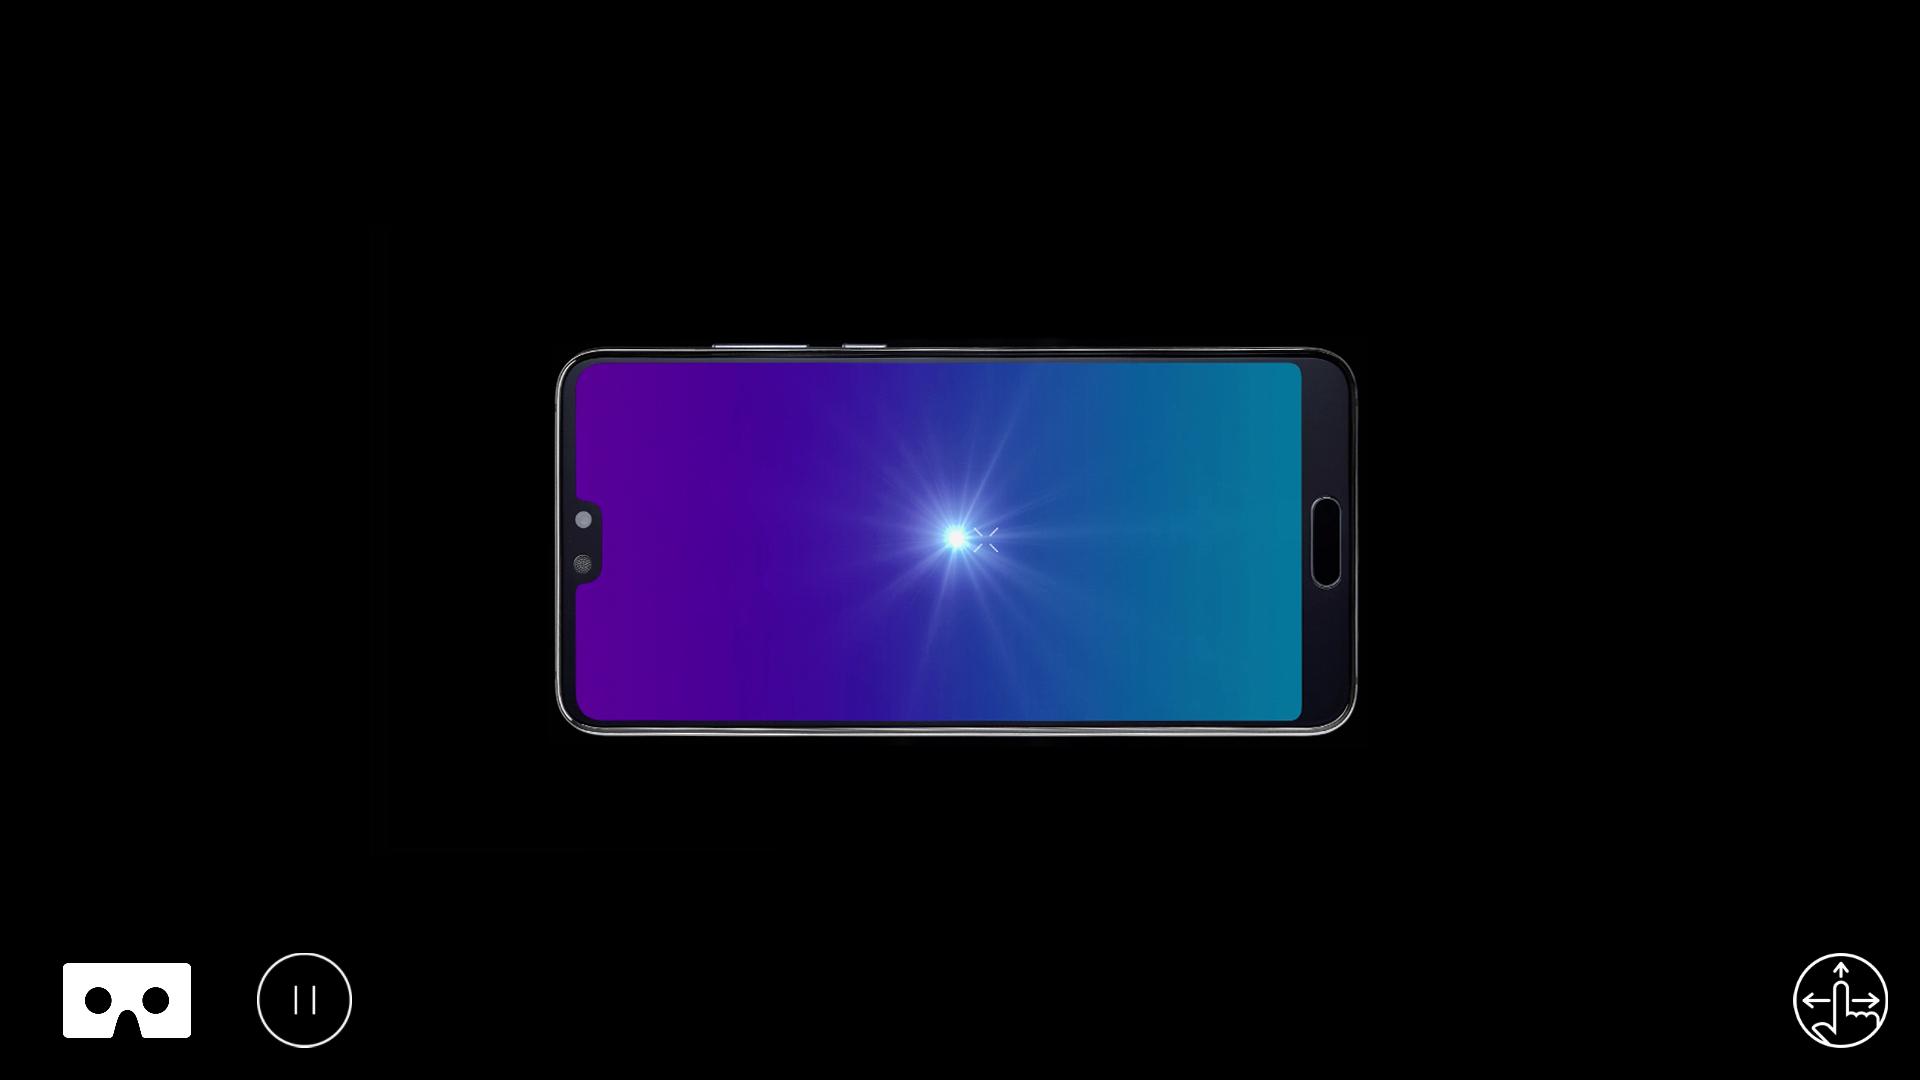 HUAWEI P20 | VR for Android - APK Download